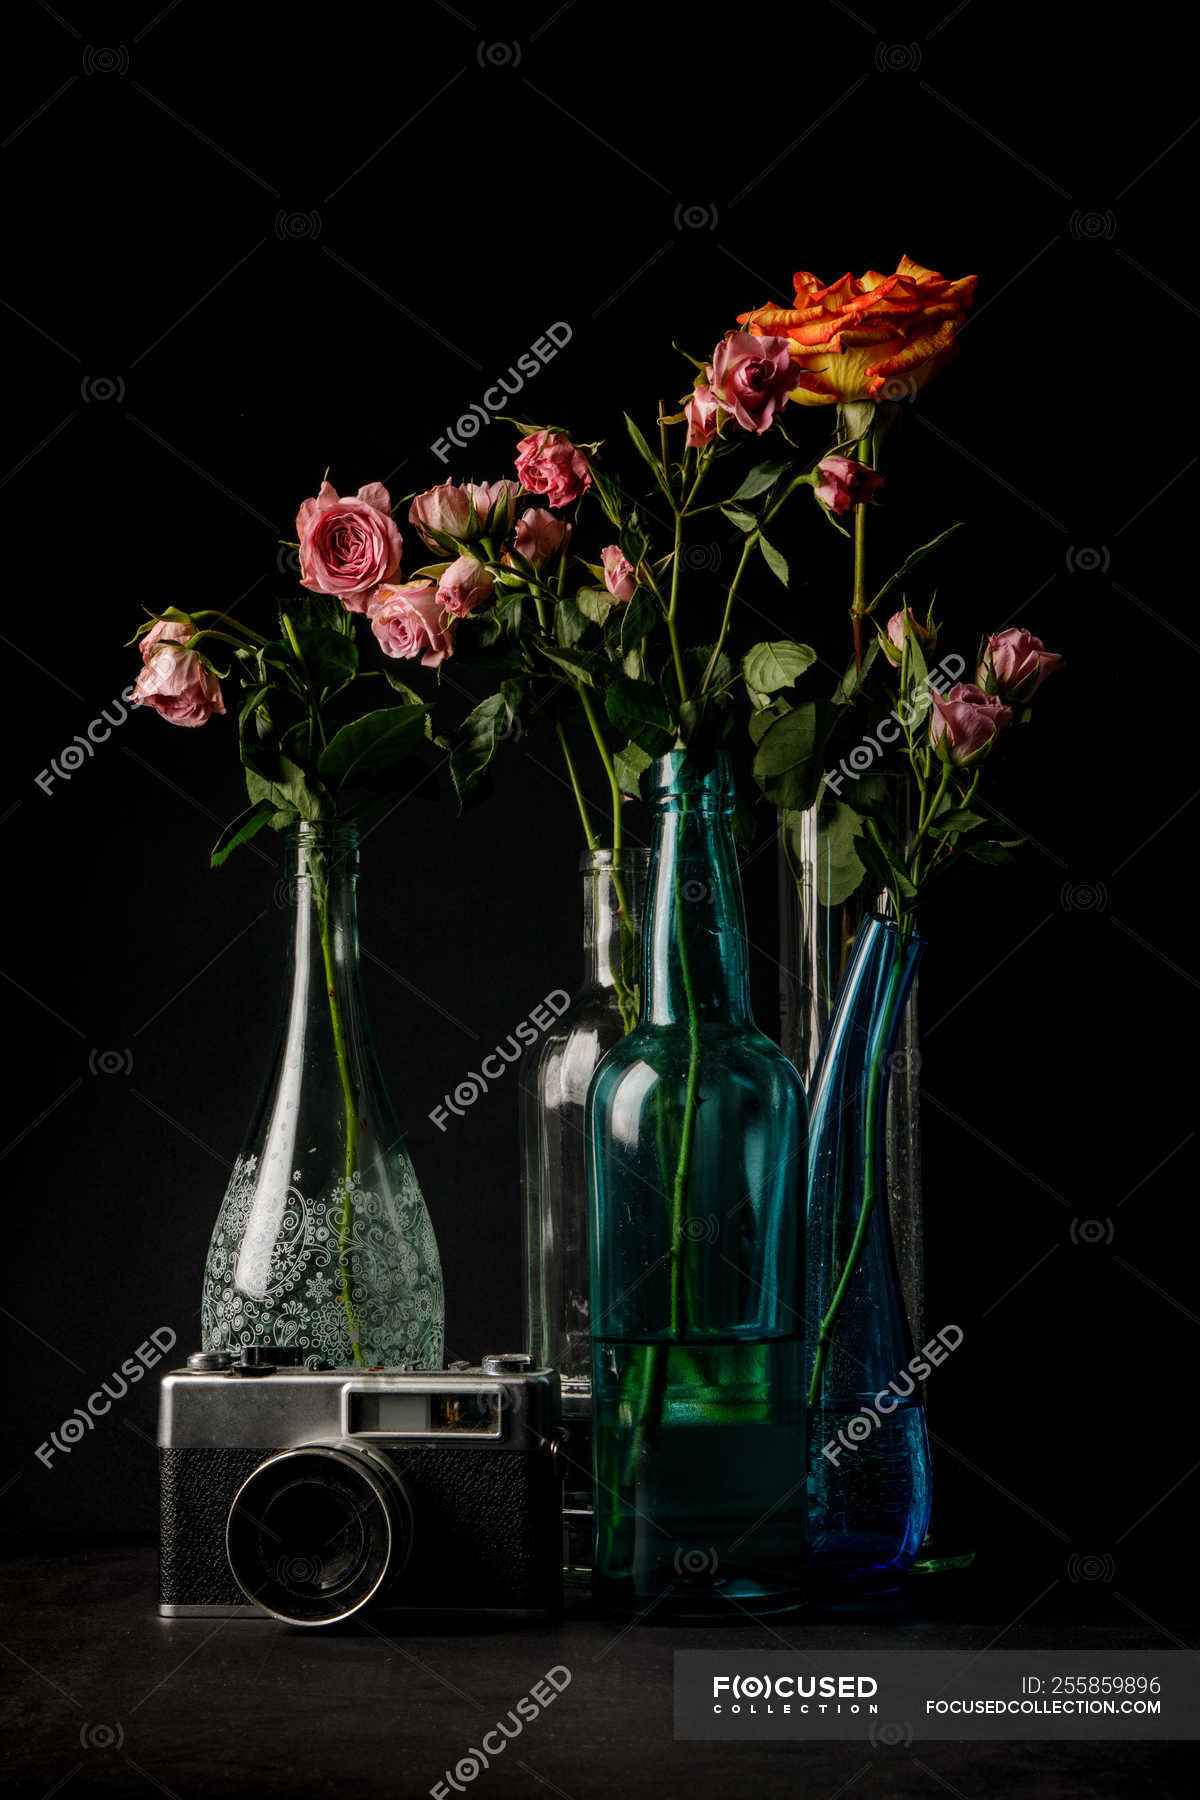 Vintage photo camera and glass vases with bouquets of lovely flowers on  black background — fresh, composition - Stock Photo | #255859896